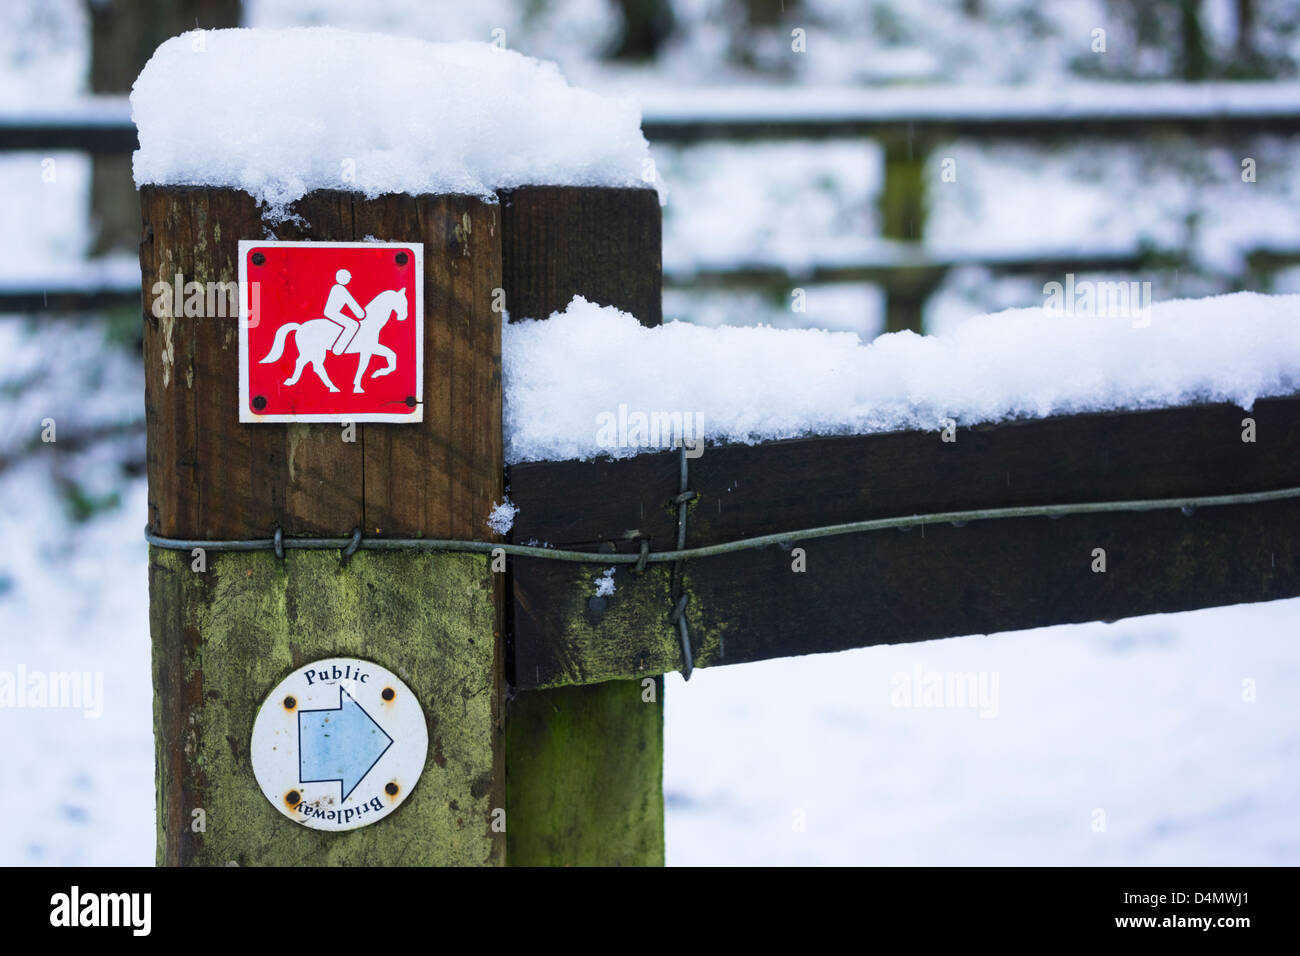 A red bridleway sign on a fence in winter. Stock Photo